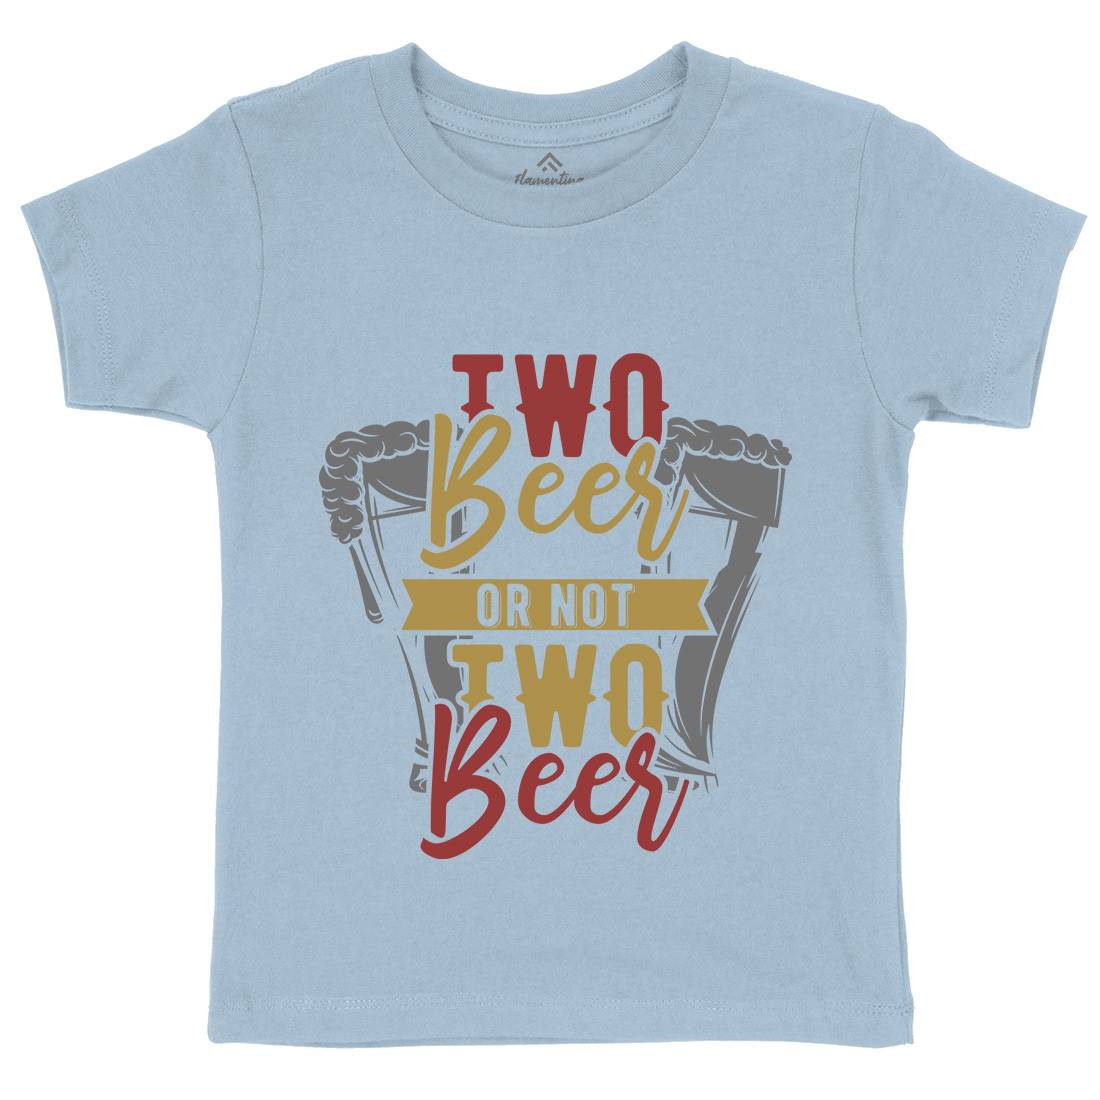 Two Beers Or Not Kids Crew Neck T-Shirt Drinks B285